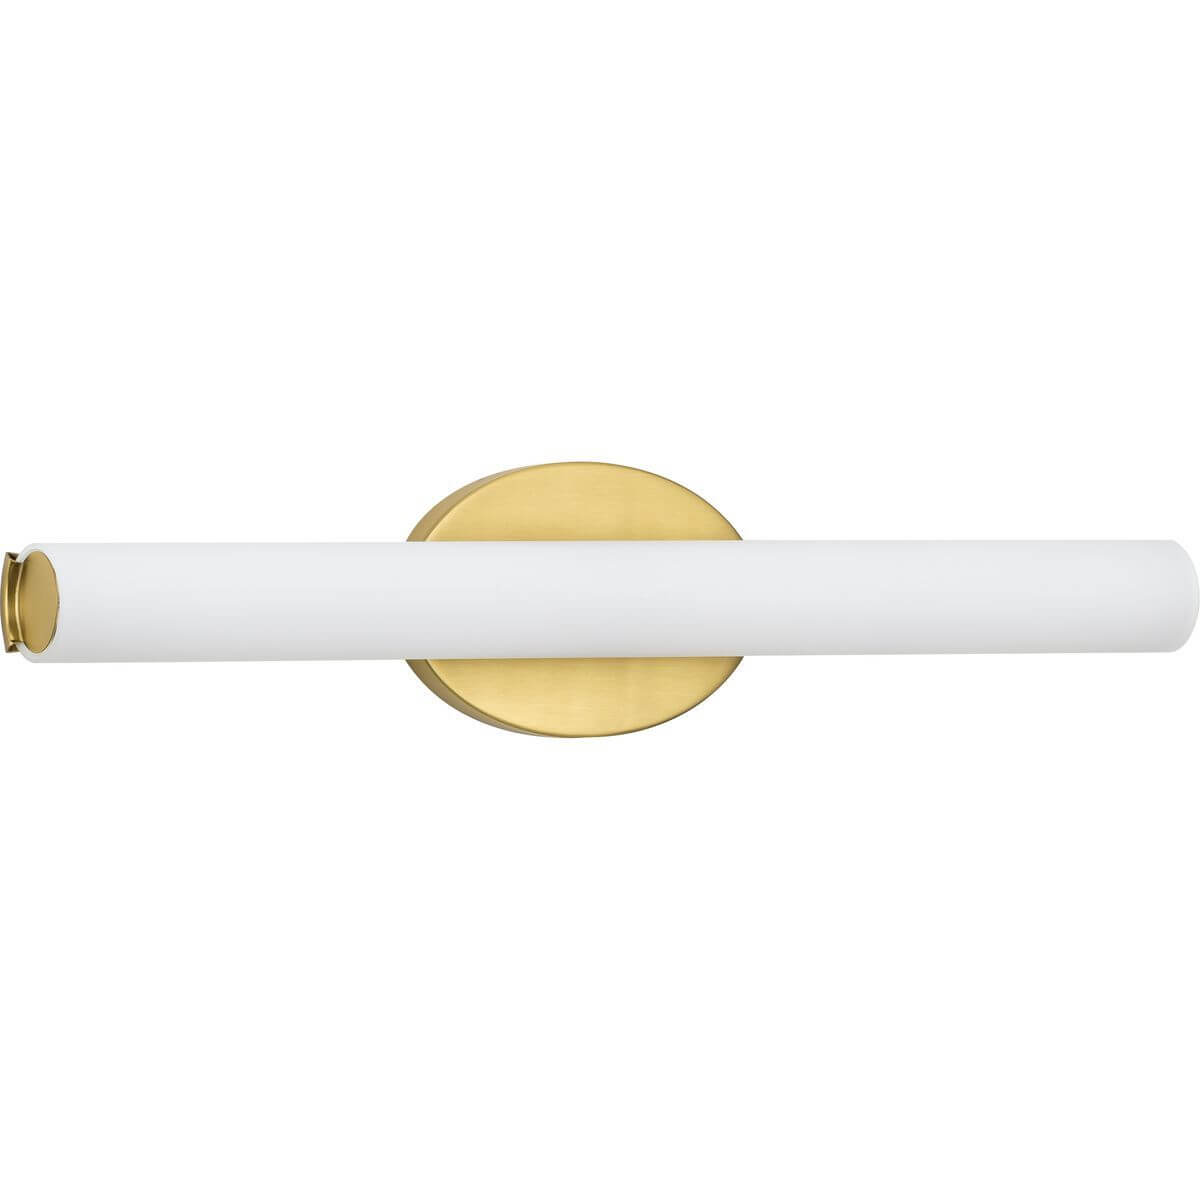 Progress Lighting Parallel 22 inch LED Bath Vanity Light in Satin Brass with Etched White Glass Shade P300183-012-30